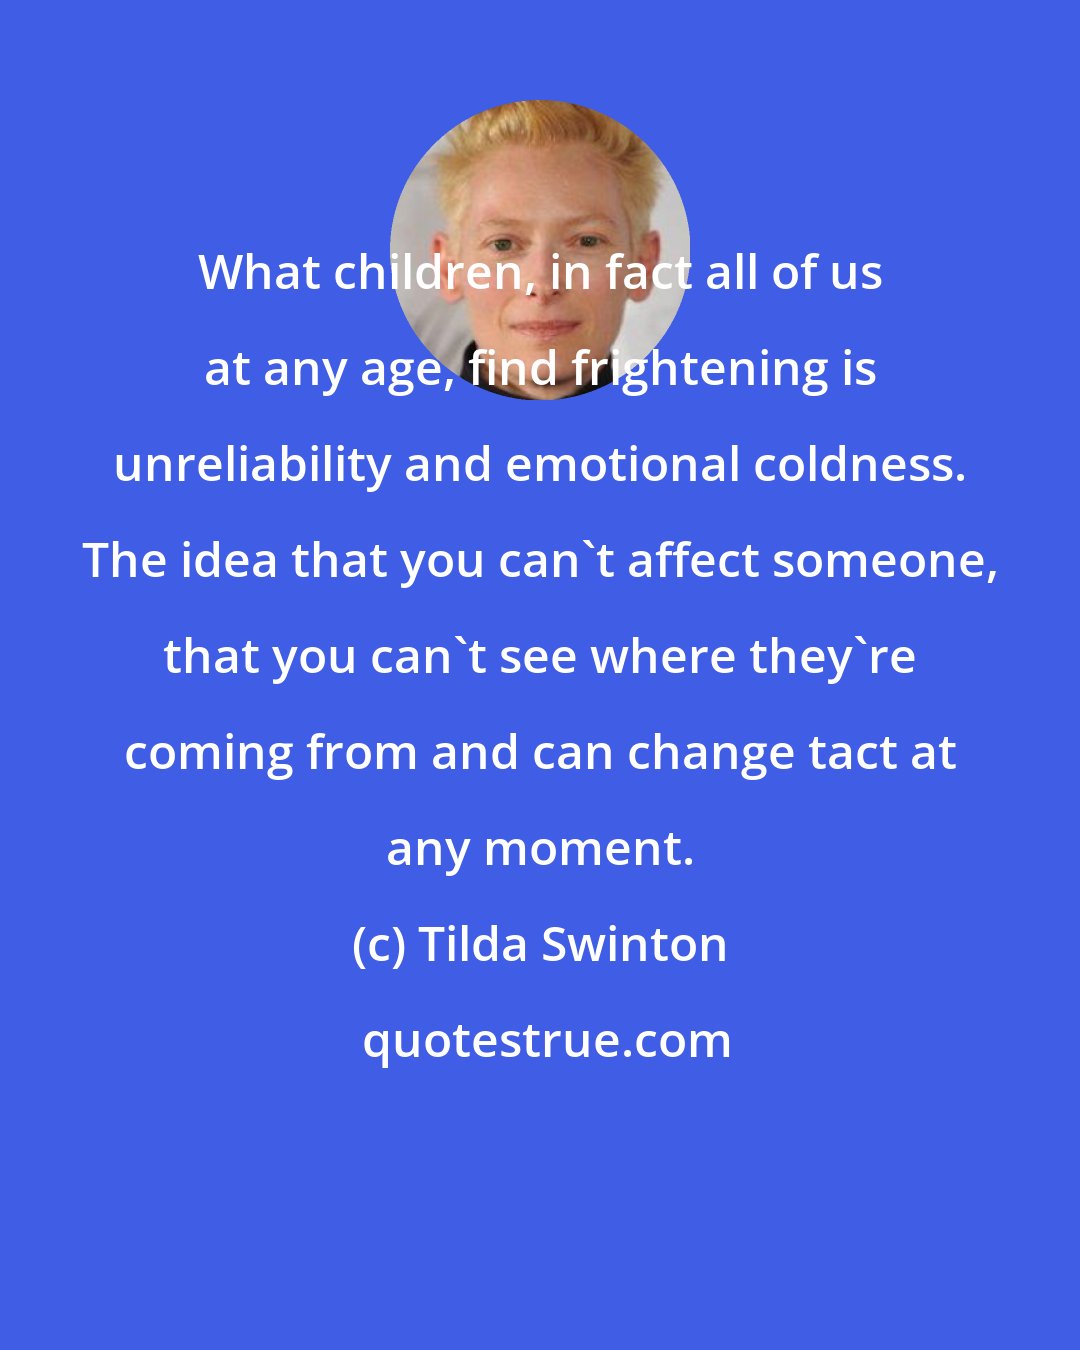 Tilda Swinton: What children, in fact all of us at any age, find frightening is unreliability and emotional coldness. The idea that you can't affect someone, that you can't see where they're coming from and can change tact at any moment.